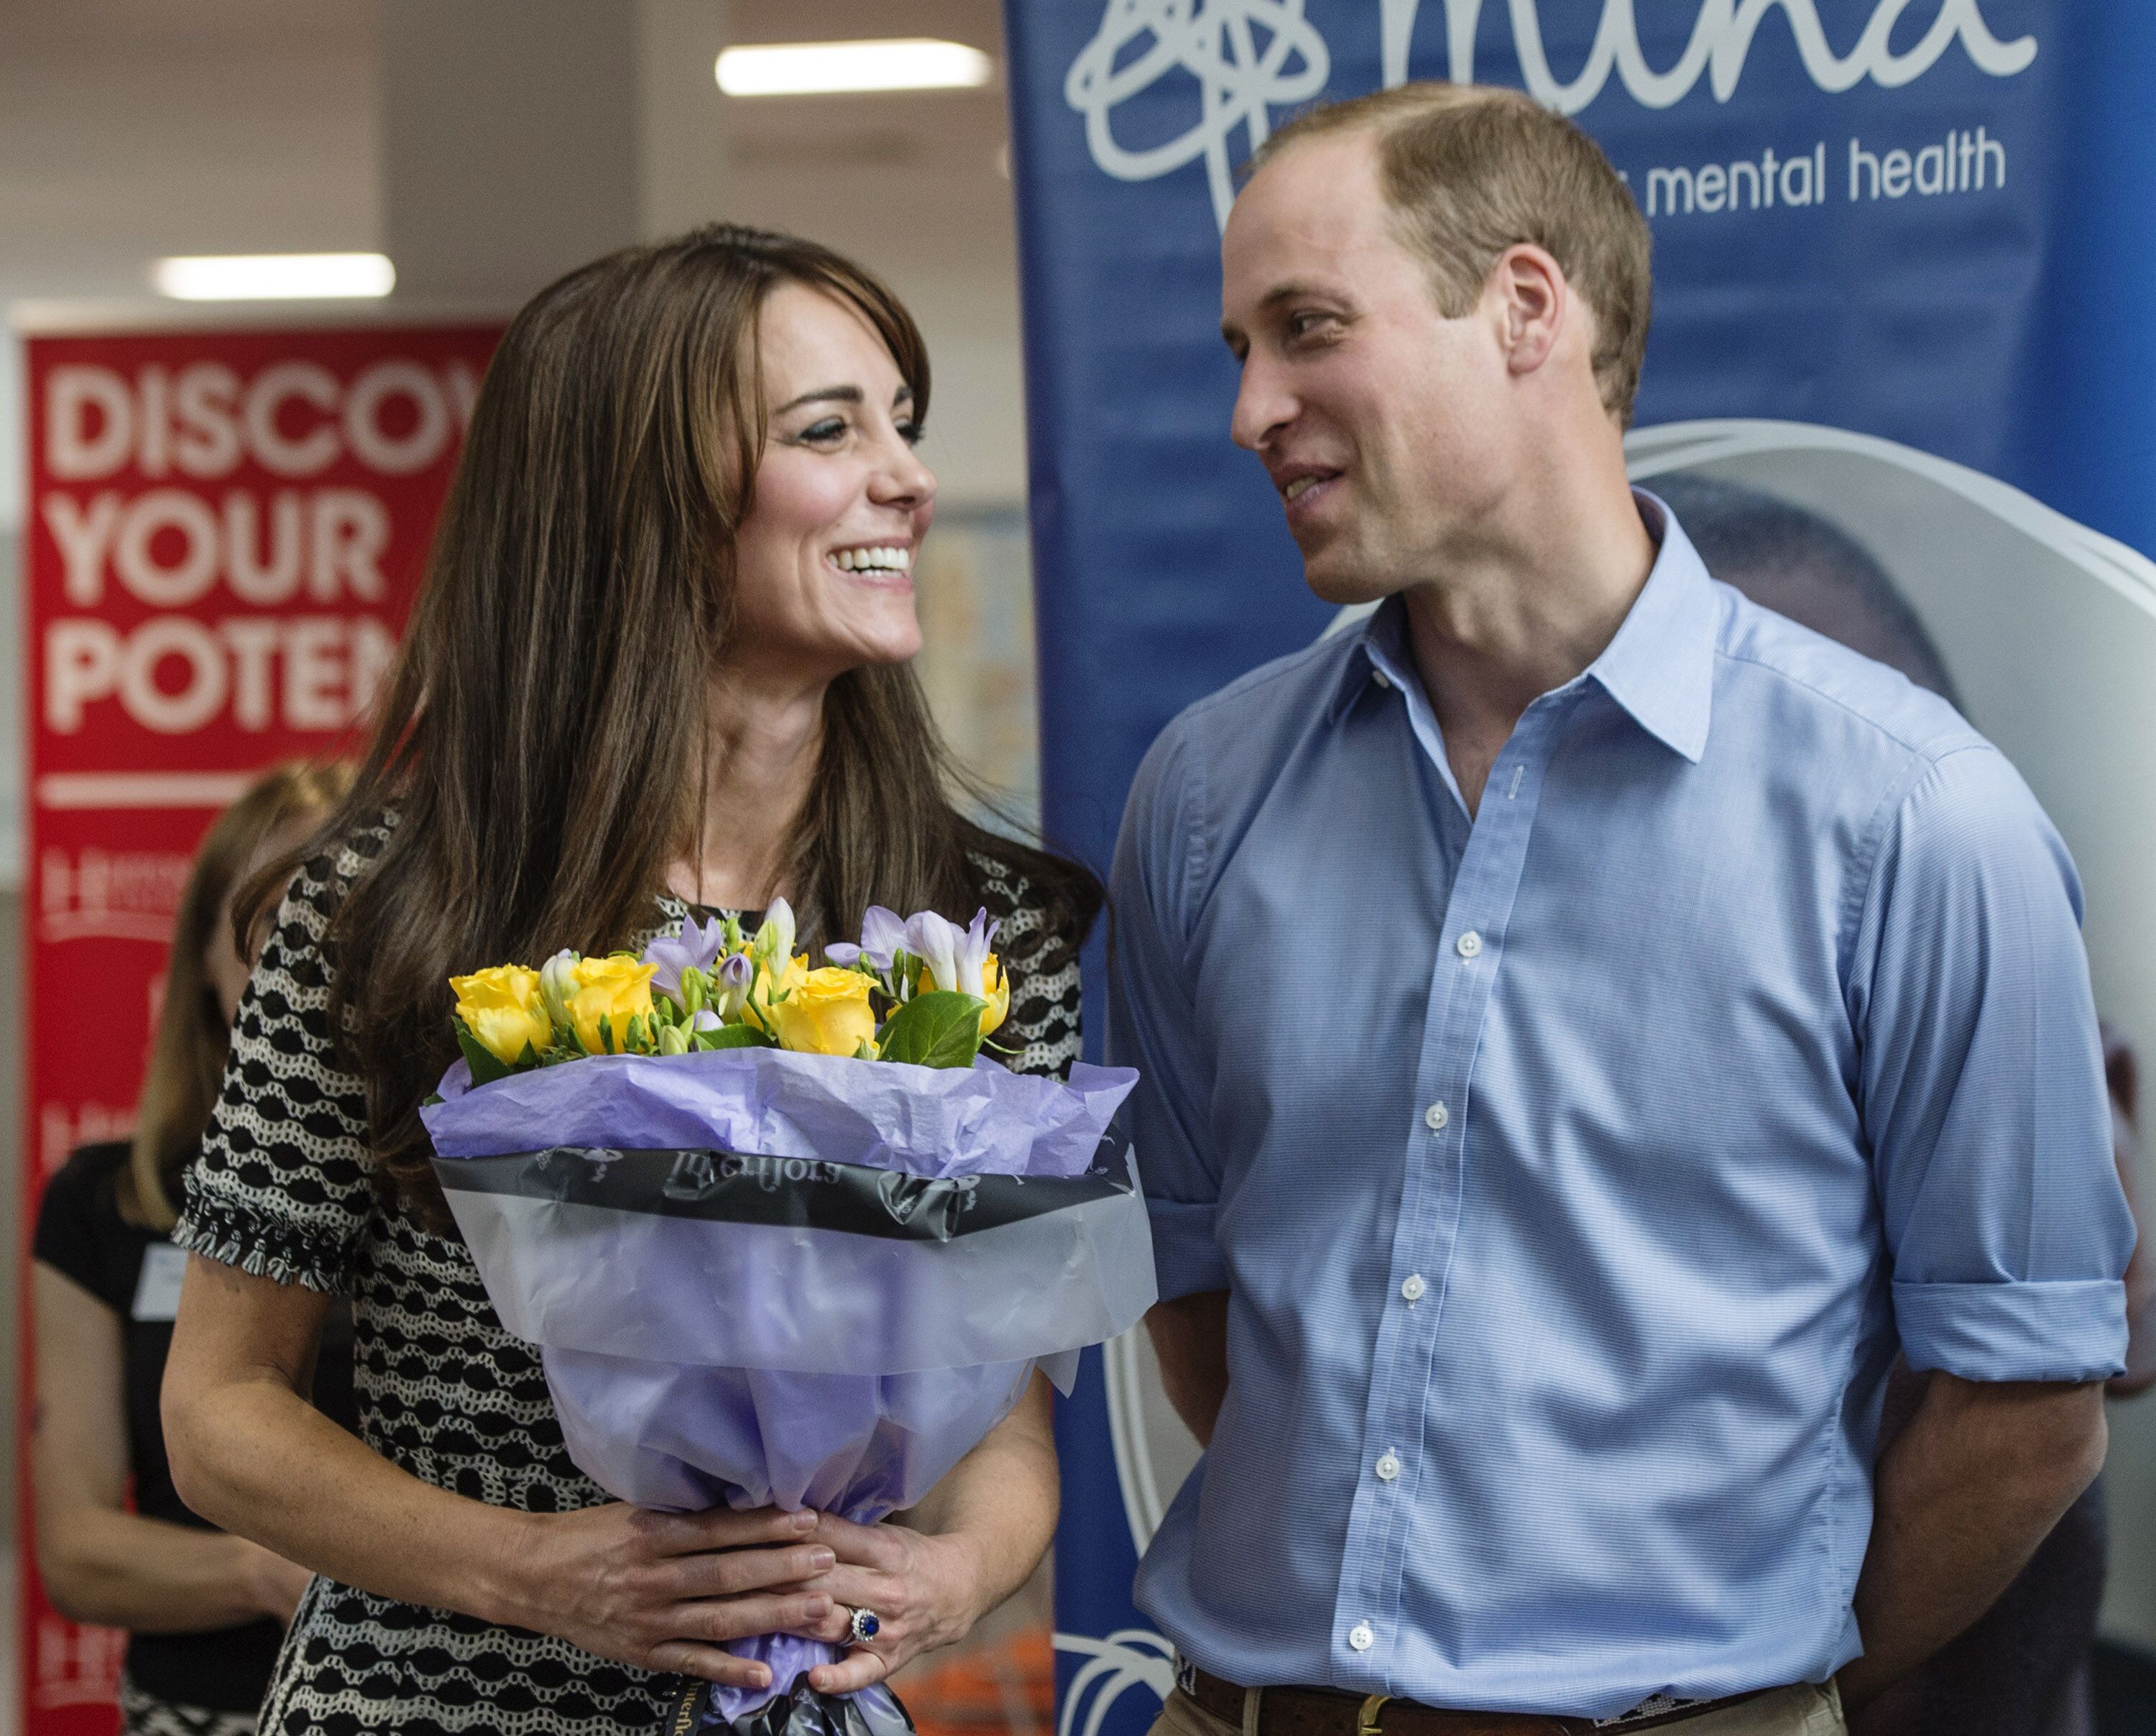 Prince William, Duke of Cambridge and Catherine, Duchess of Cambridge attend an event hosted by Mind, at Harrow College to mark World Mental Health Day in Harrow, England | Photo: Getty Images